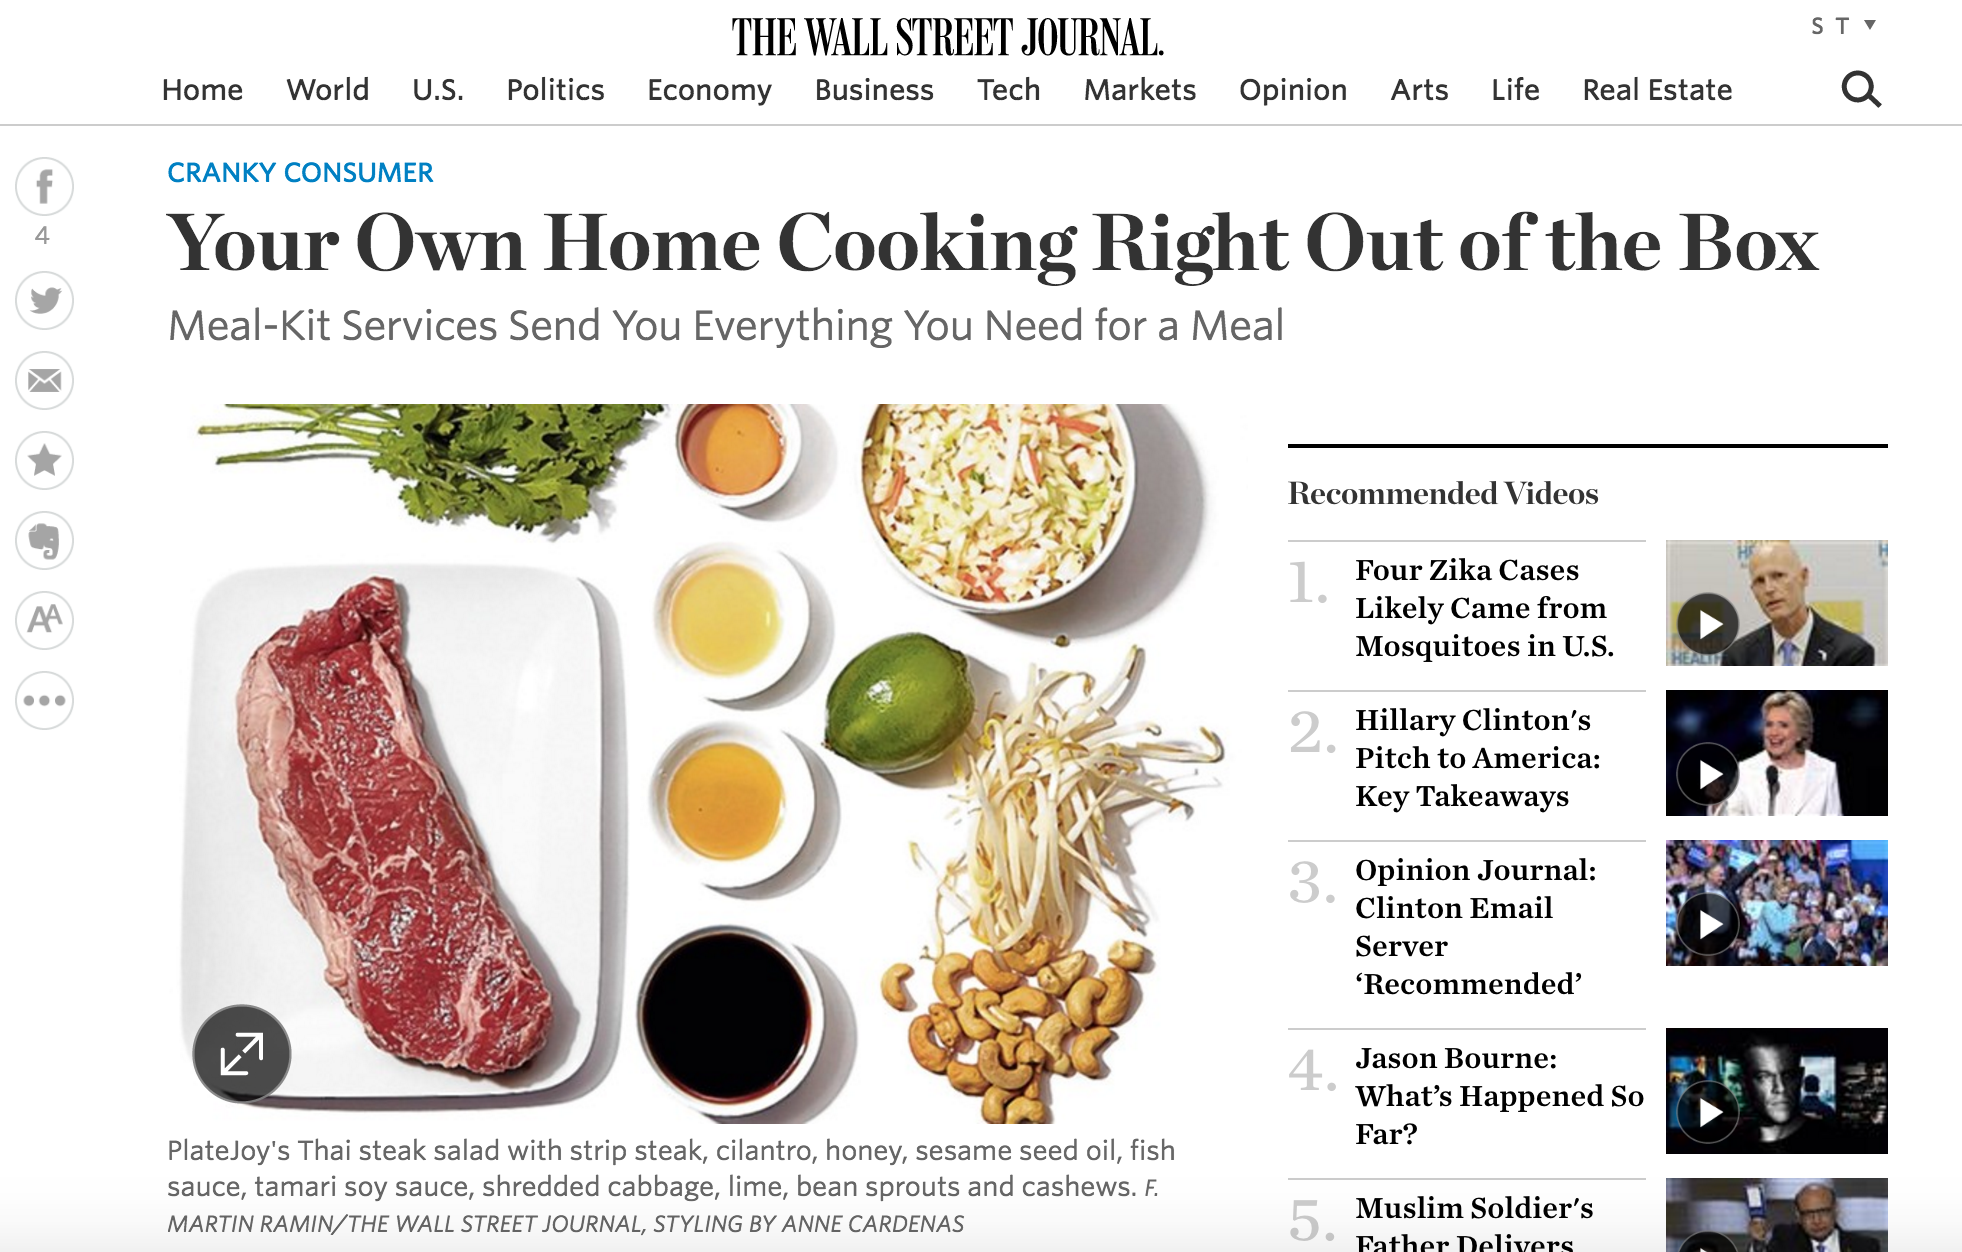 Your Own Home Cooking Right Out of the Box, The Wall Street Journal